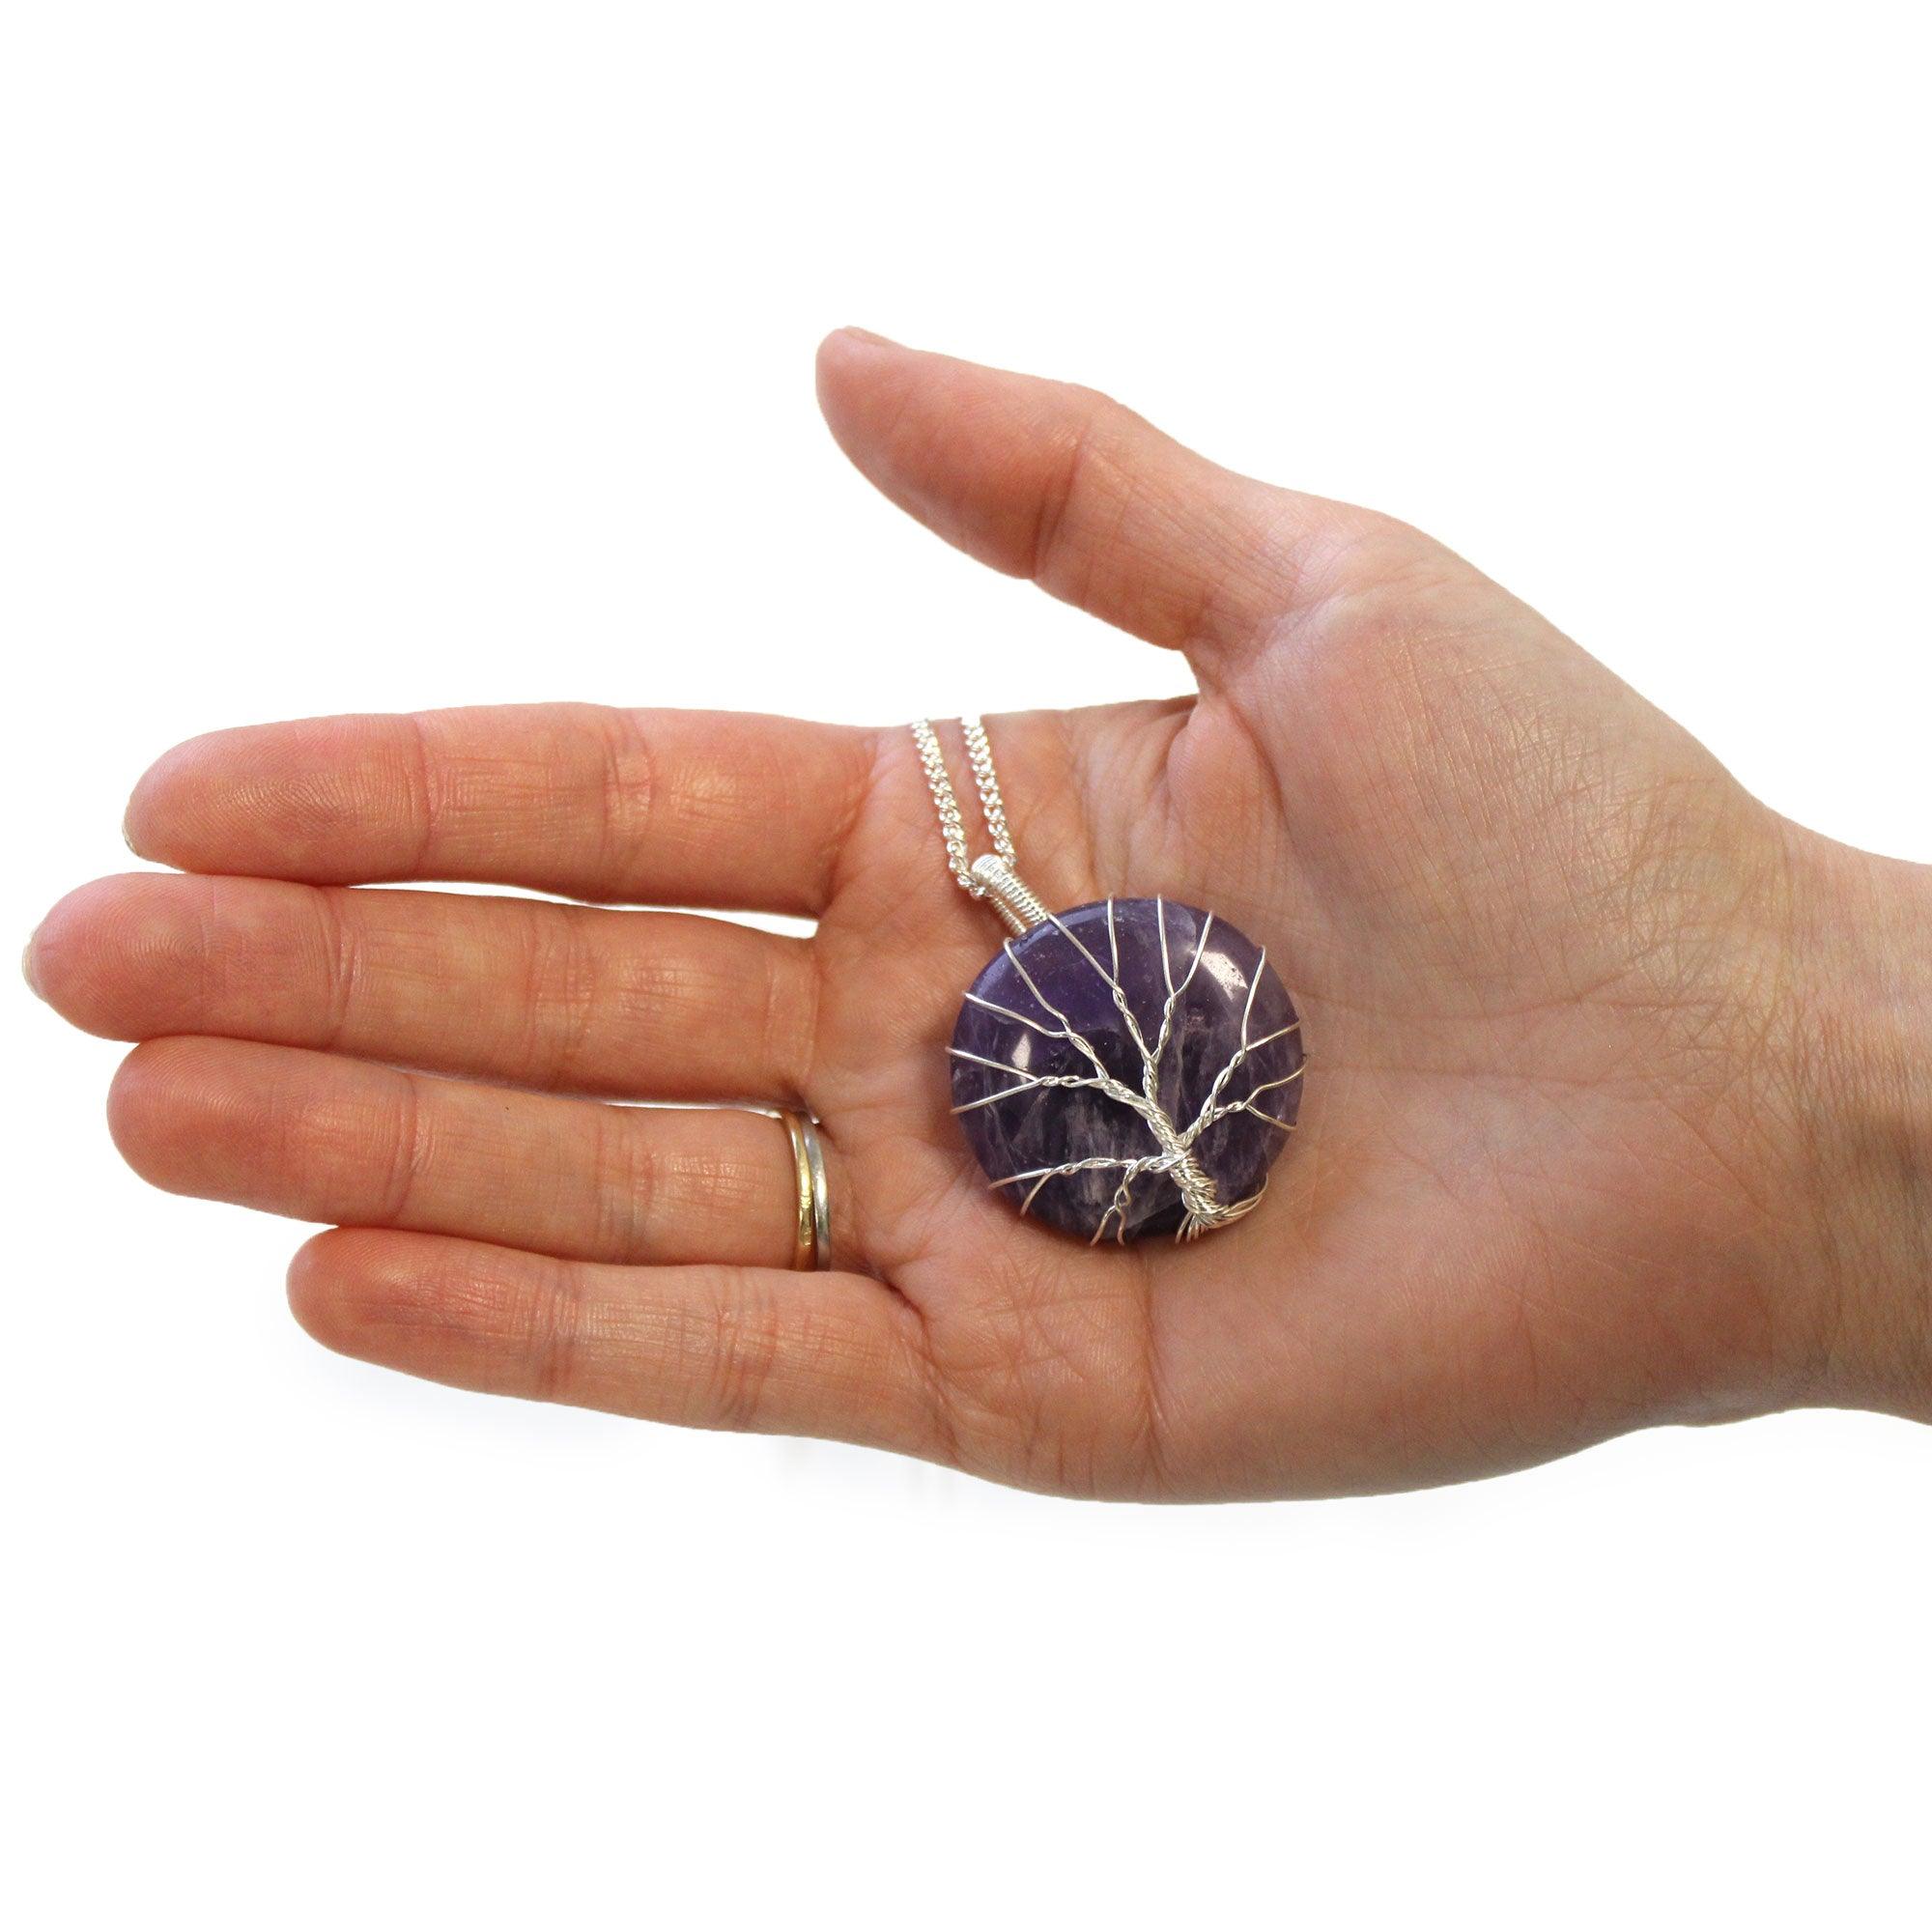 Tree of Life Gemstone Necklace - Amethyst - Charming Spaces